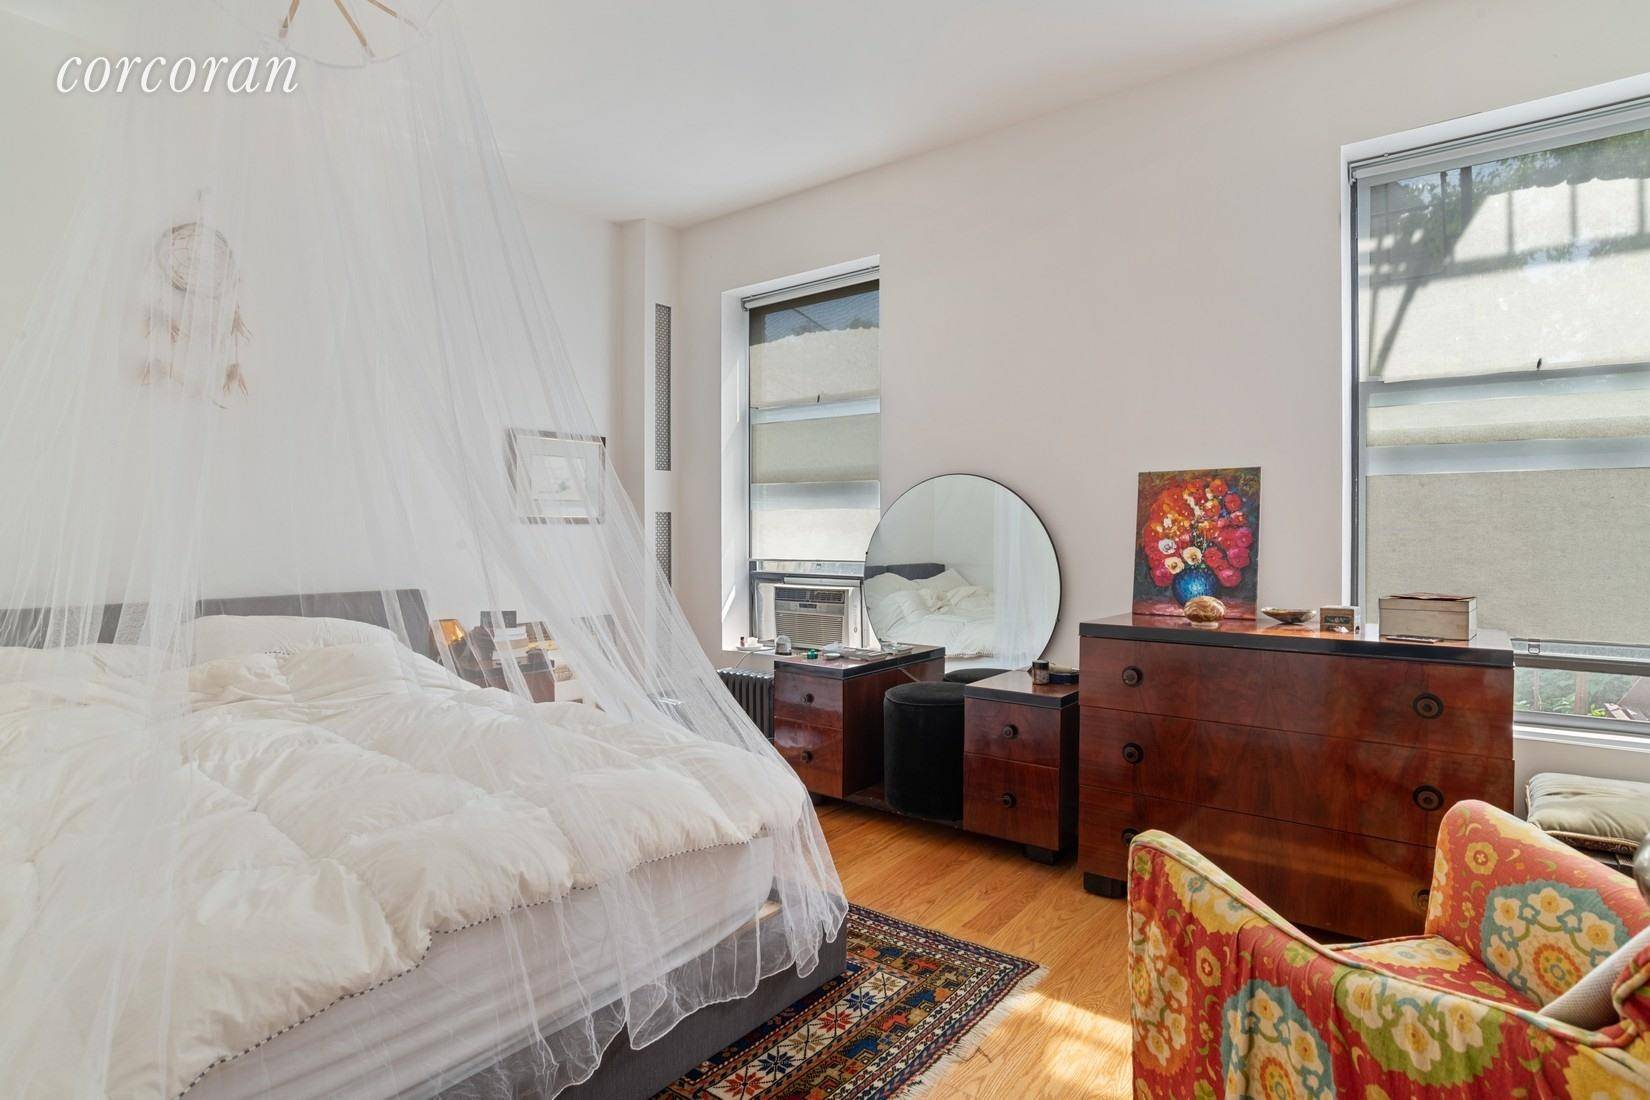 Newly renovated two bedroom could easily be used as three, 1 full bath, and 2 half bath apartment with bonus rec room and shared outdoor space on sunny Ocean Parkway.